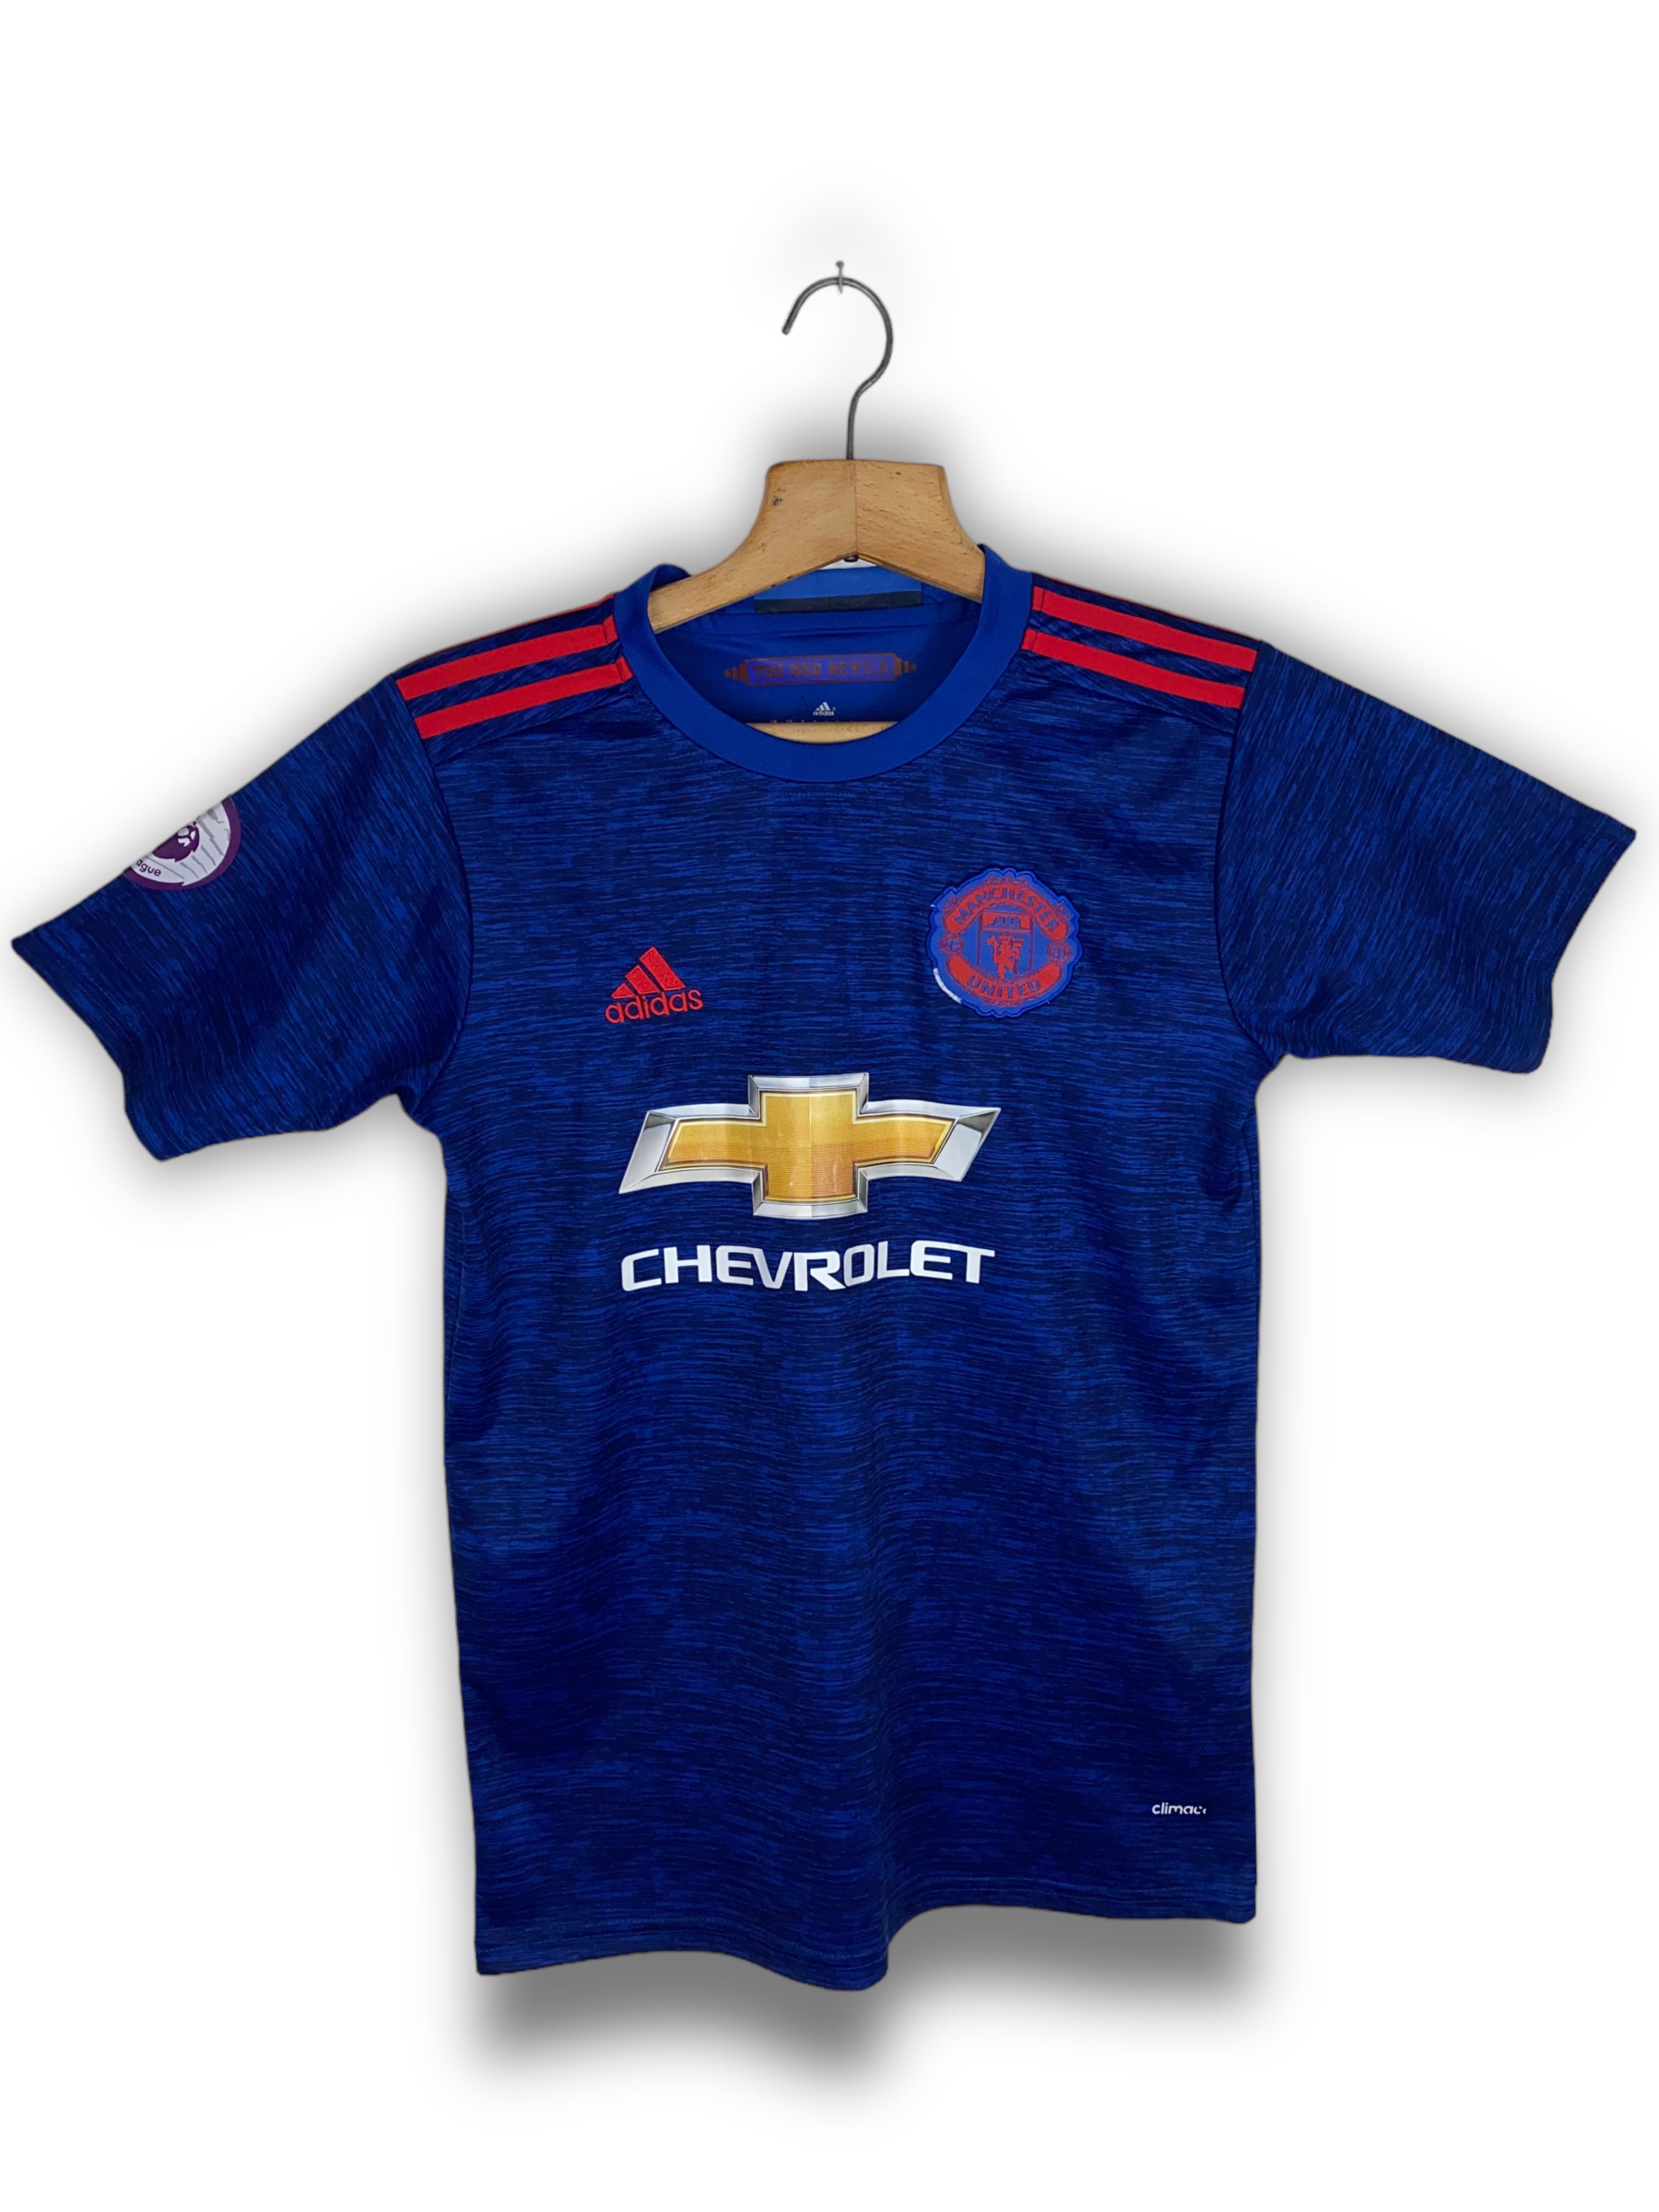 Pre-owned Adidas X Manchester United Vintage 16/17 Ibrahimovic Manchester United Navy Jersey M471 In Deep Blue